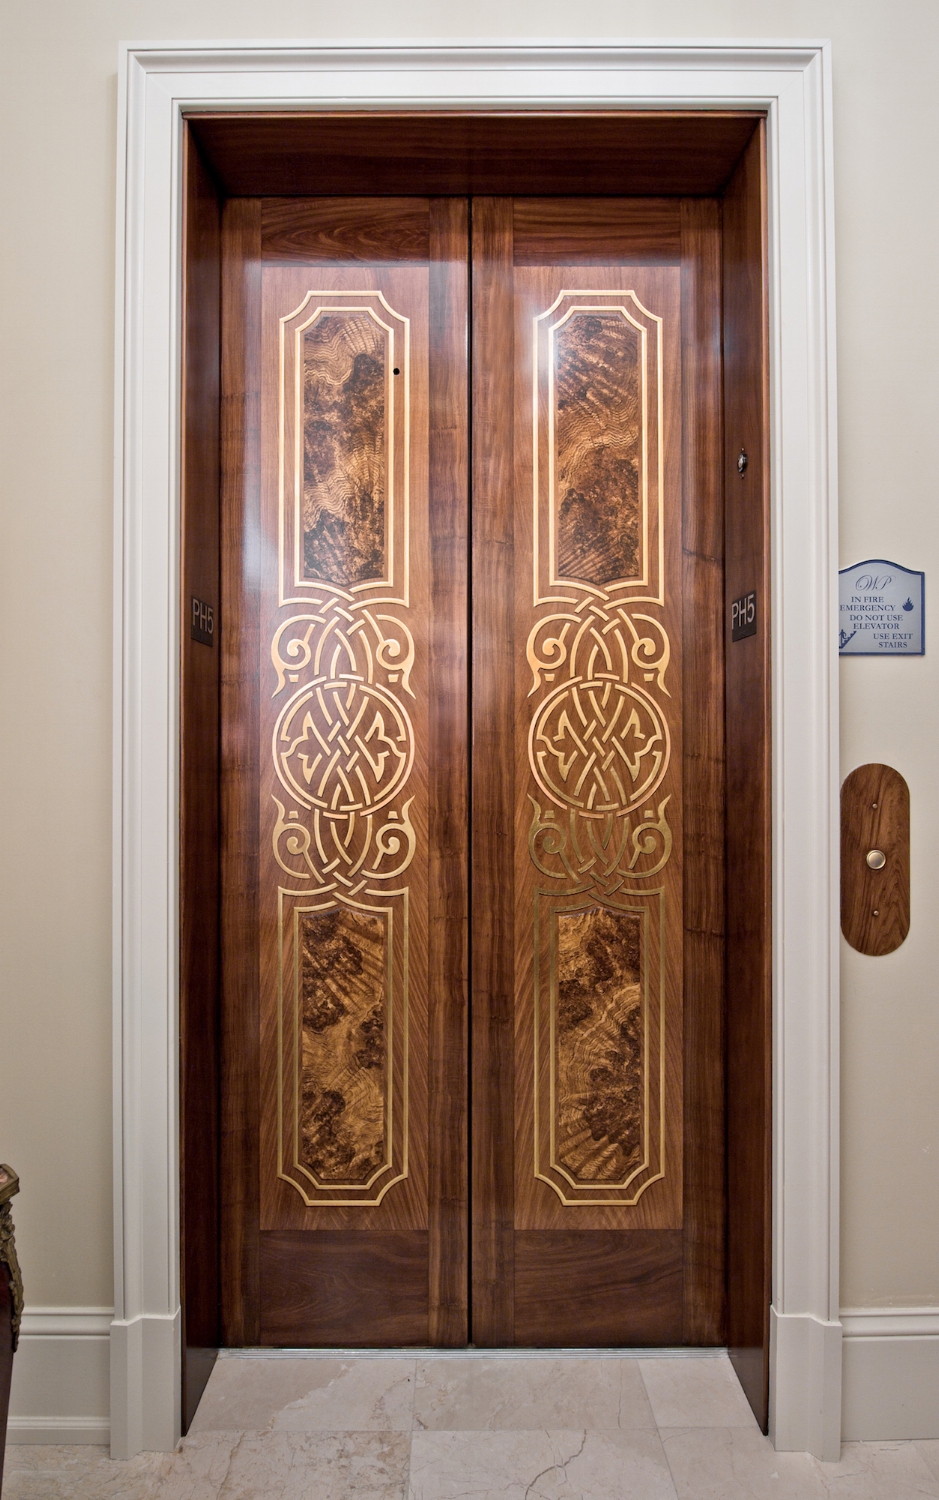  These stainless steel elevator doors were painted using a woodgraining technique. The custom design on the doors were gilded using Japanese Colored Silver Leaf. 